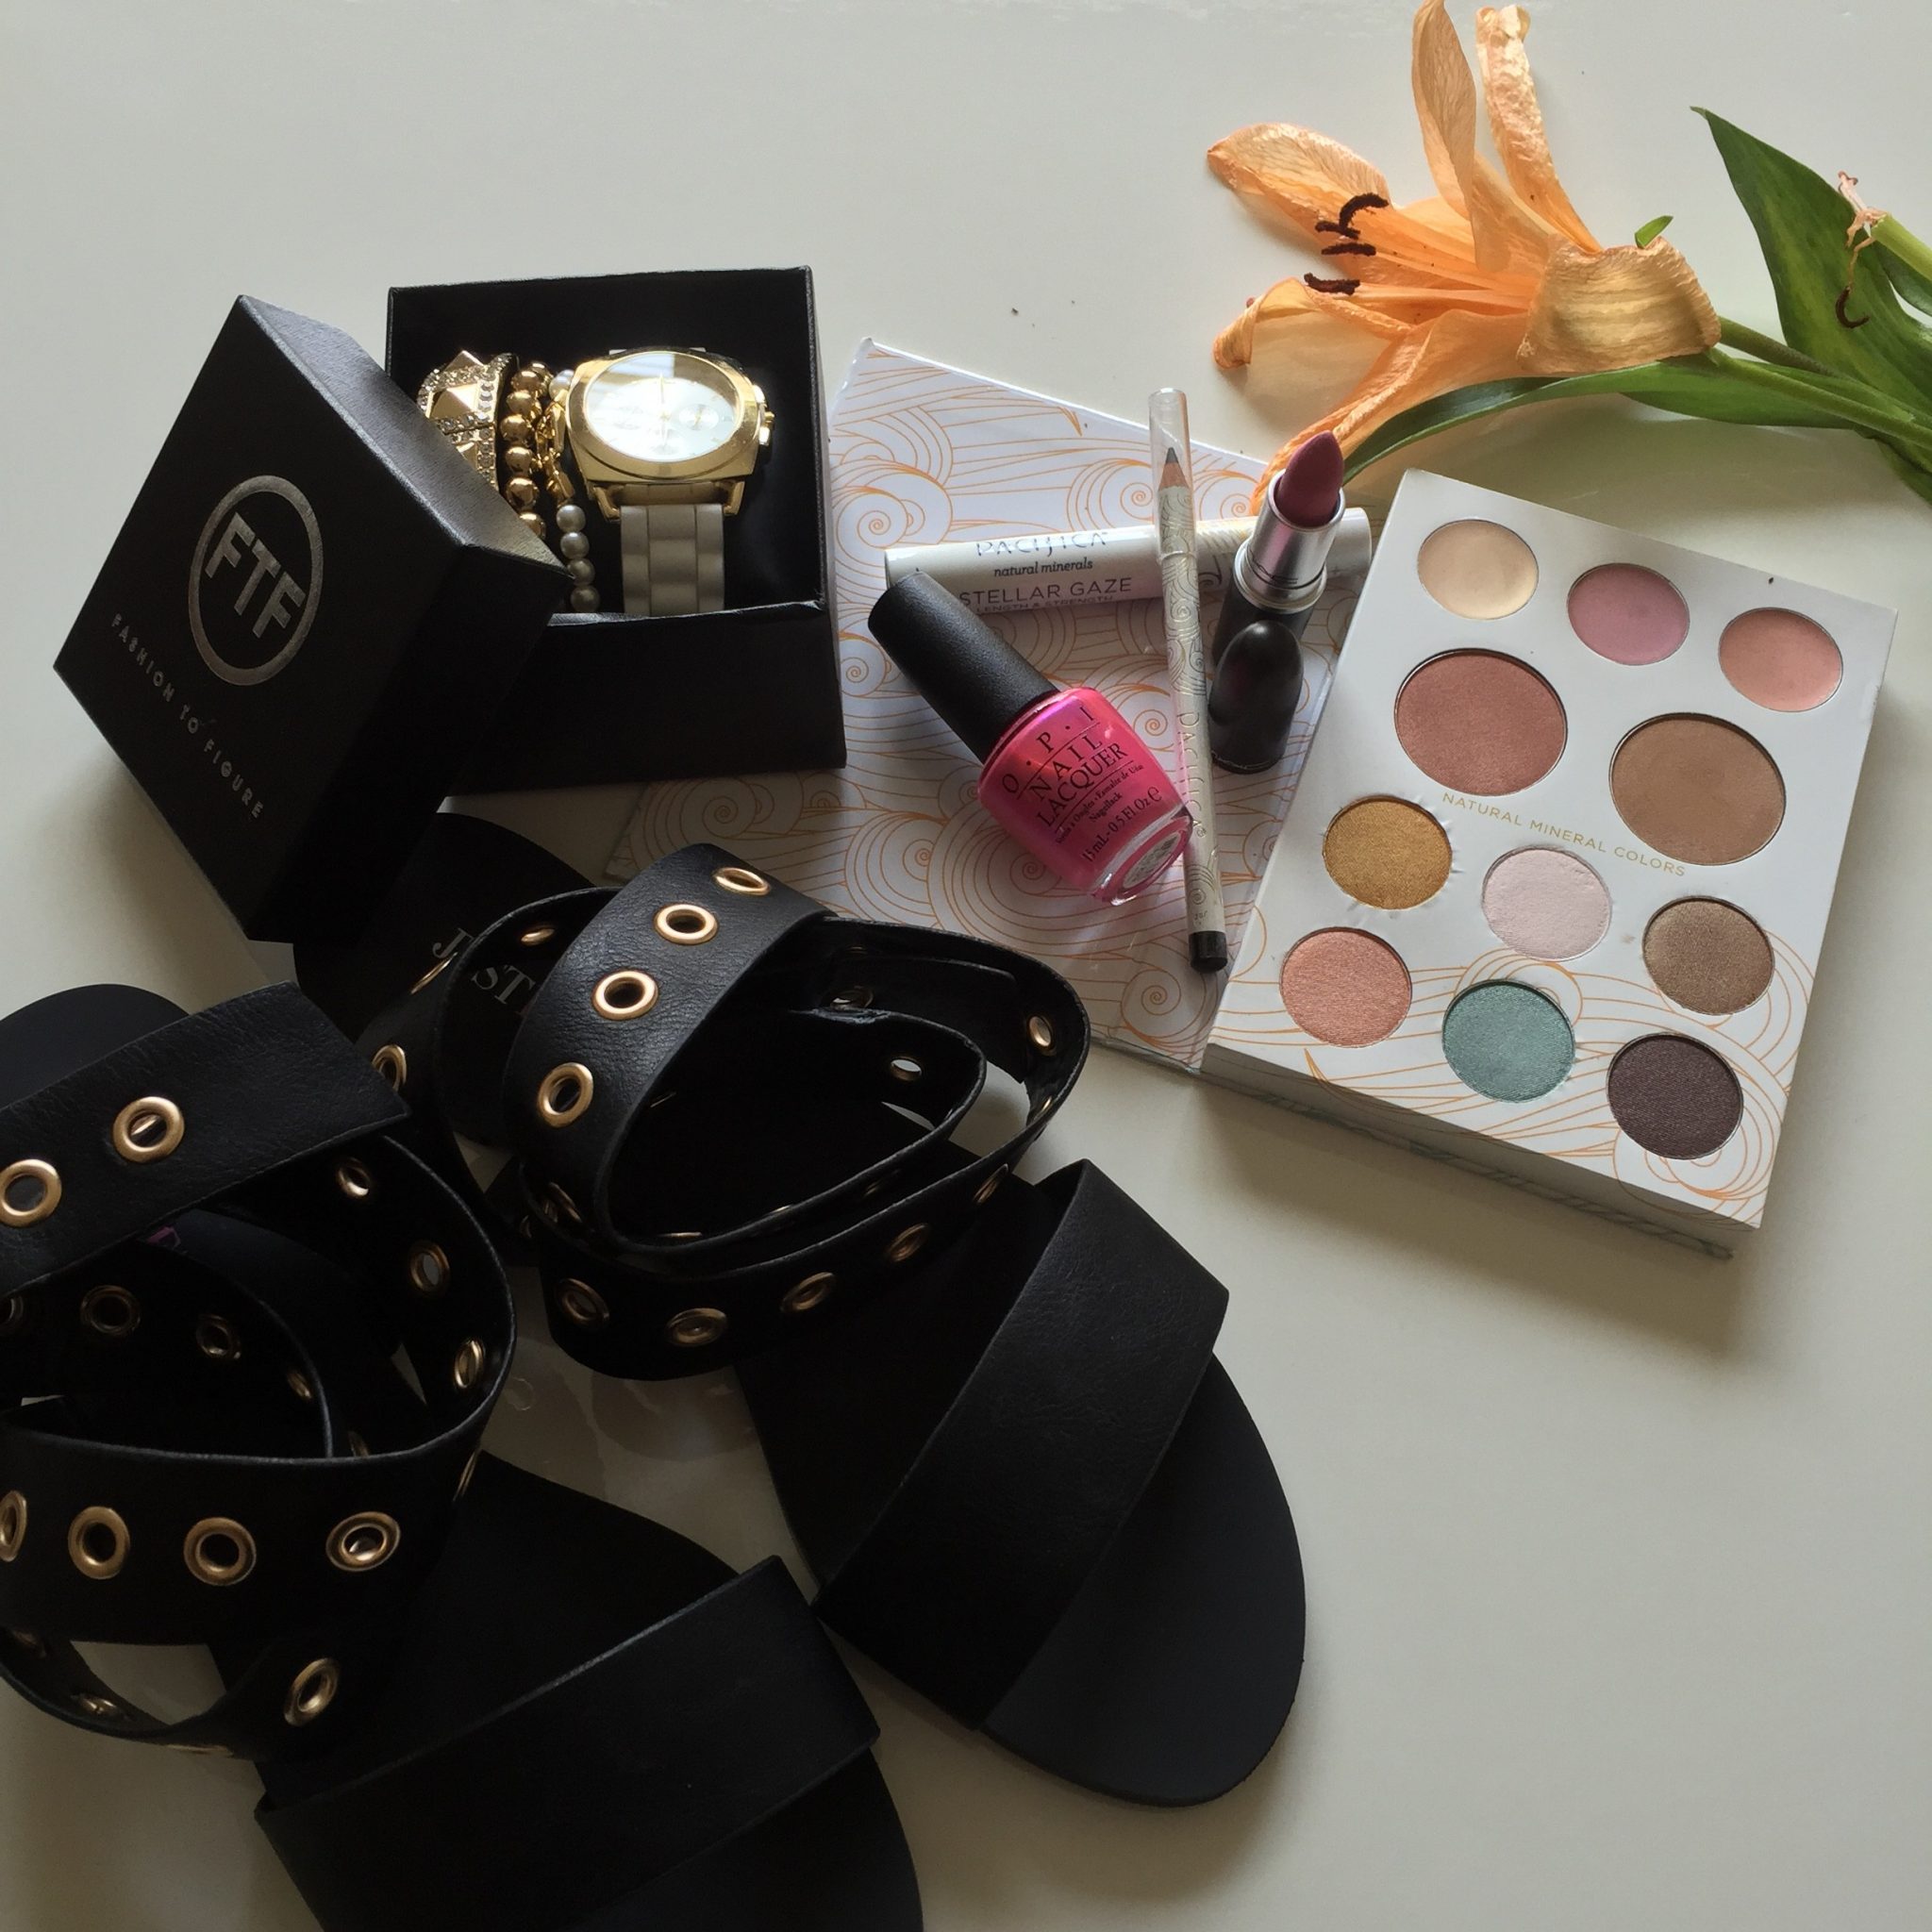 Fashion And Beauty Items I’m Currently Loving